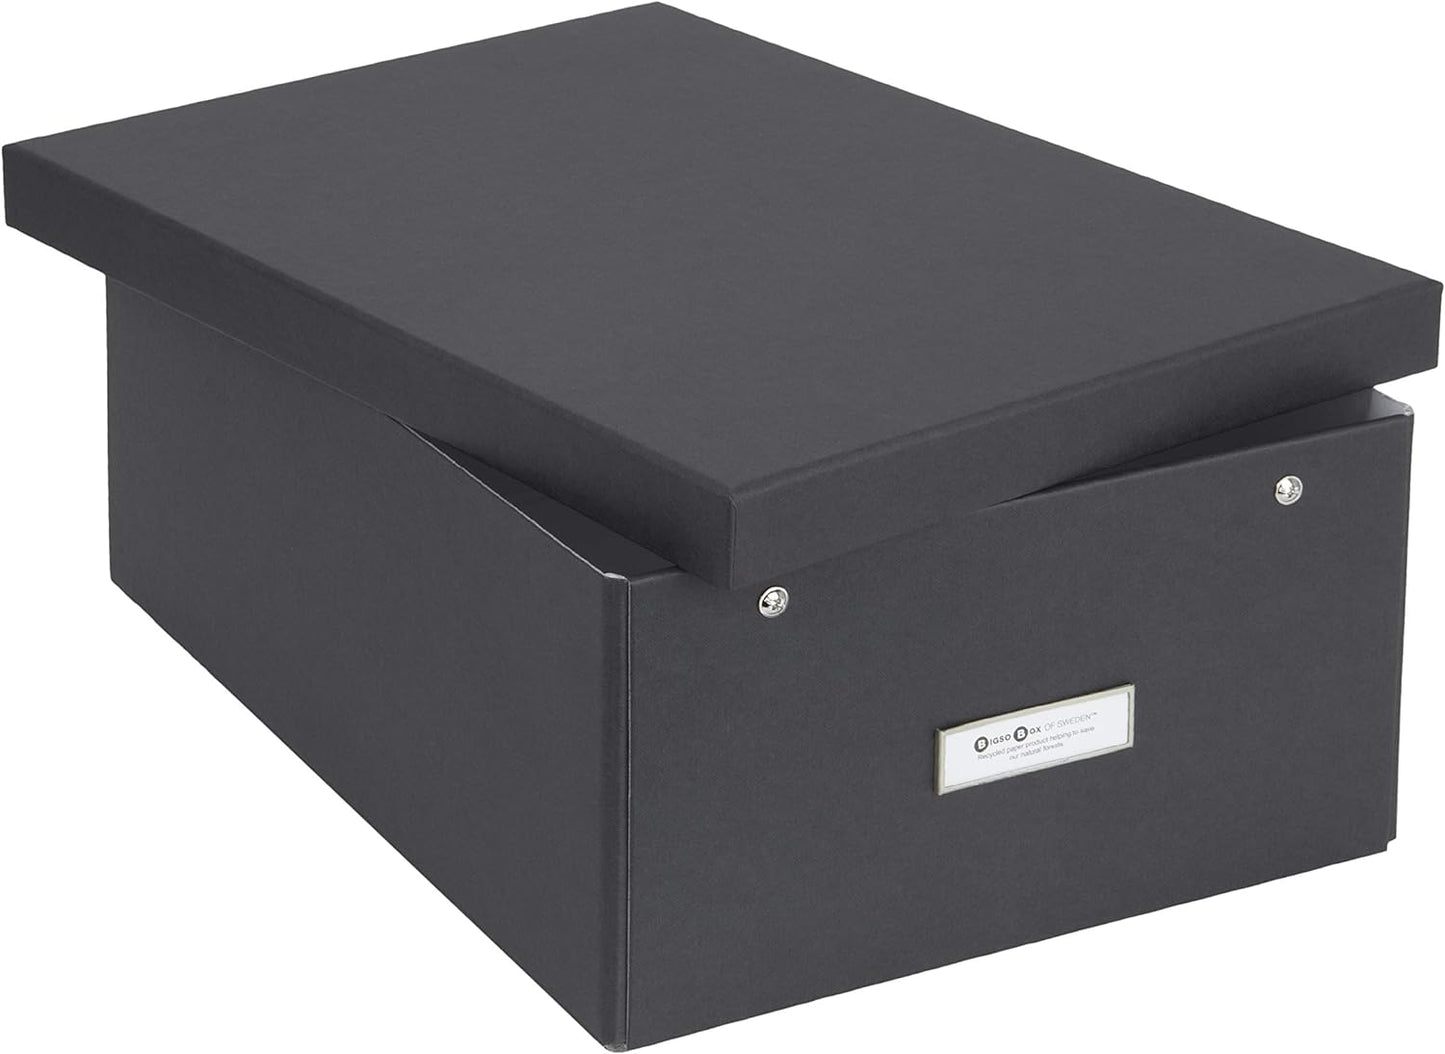 Bigso Karin Collapsible Photo Storage Box with Lid 8.9″ x 12.4″ x 5.4″